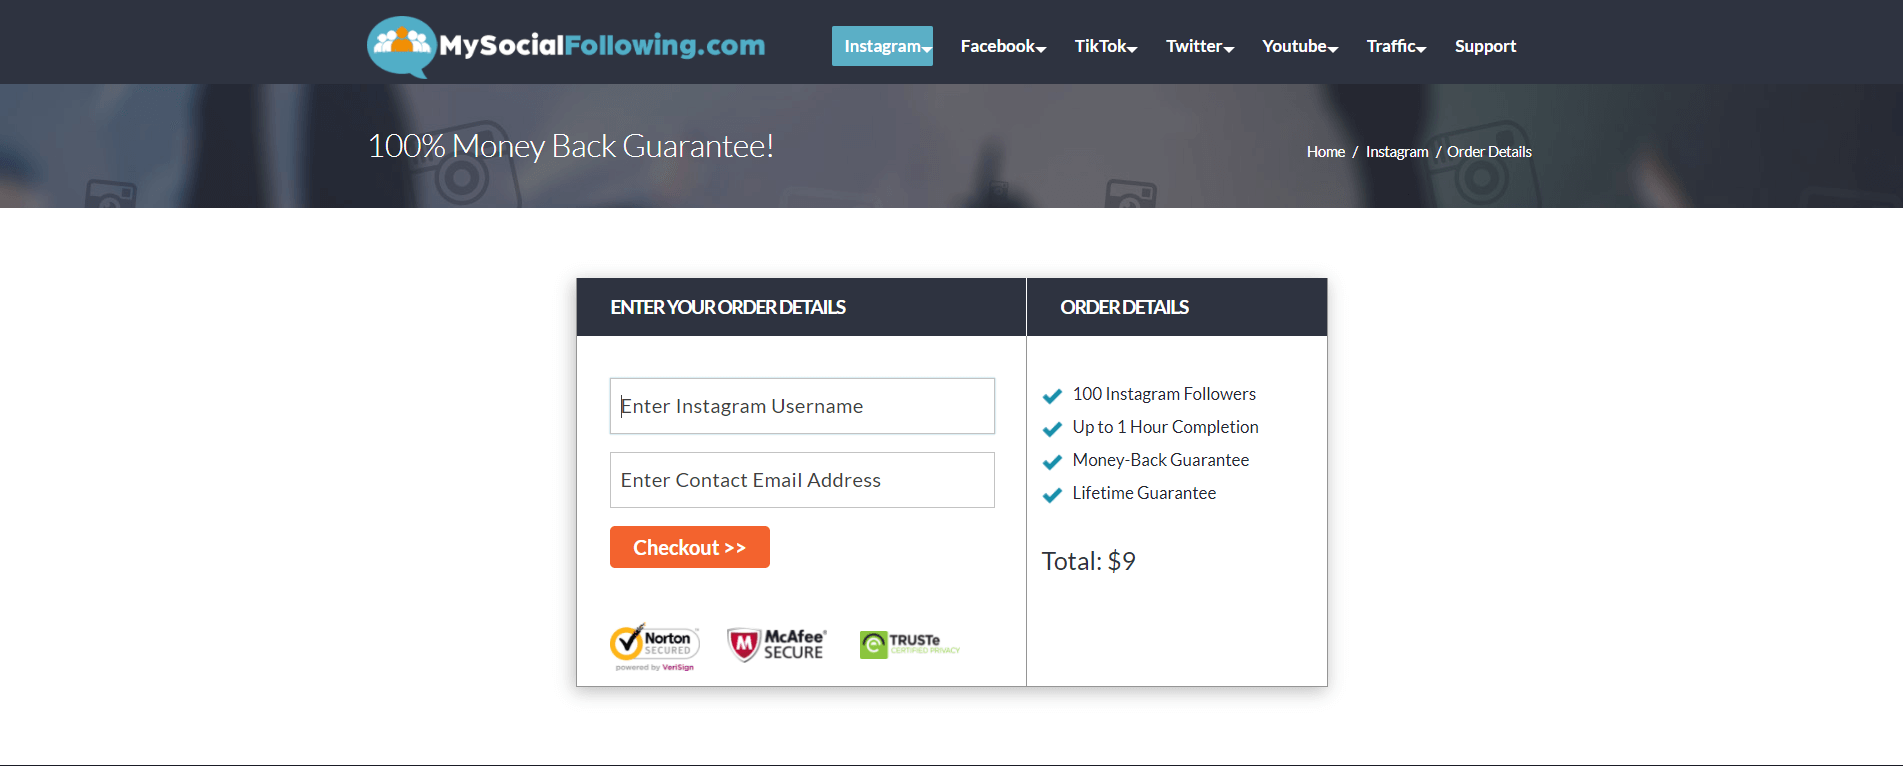 A screenshot showing the money-back guarantee policy on the official Mysocialfollowing website.